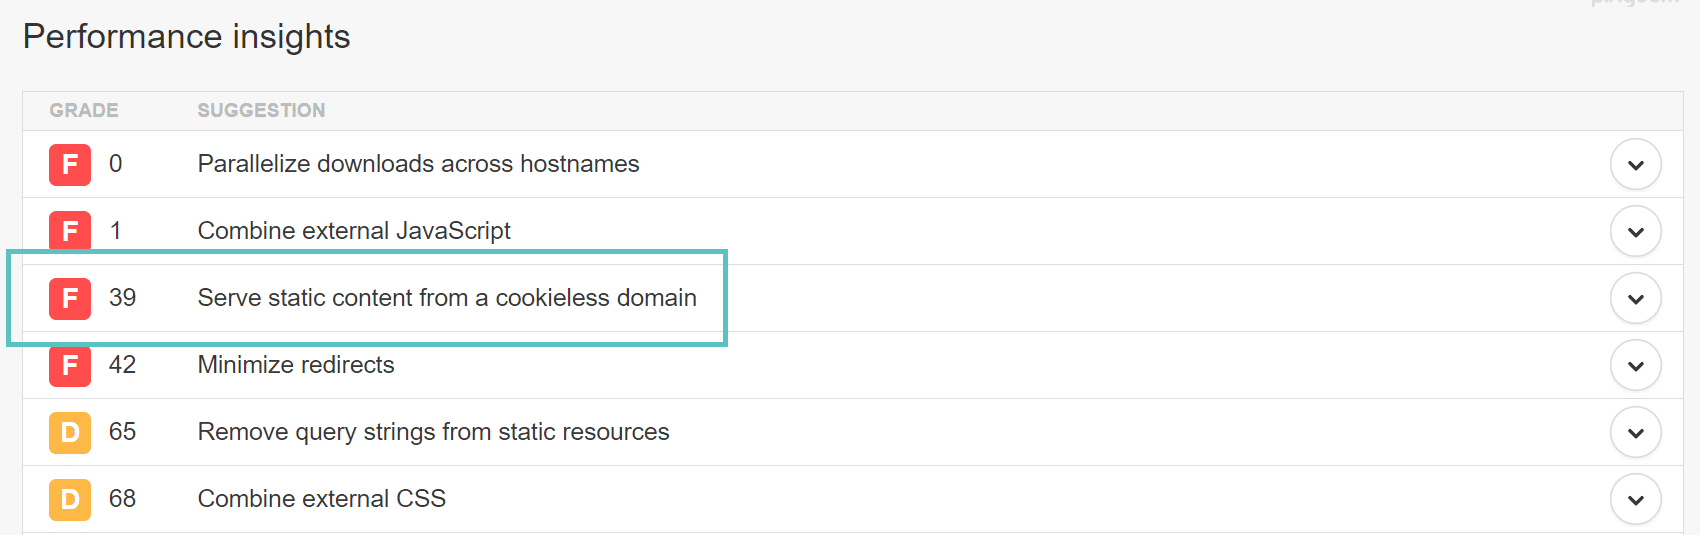 Avertissement Serve static content from a cookieless domain